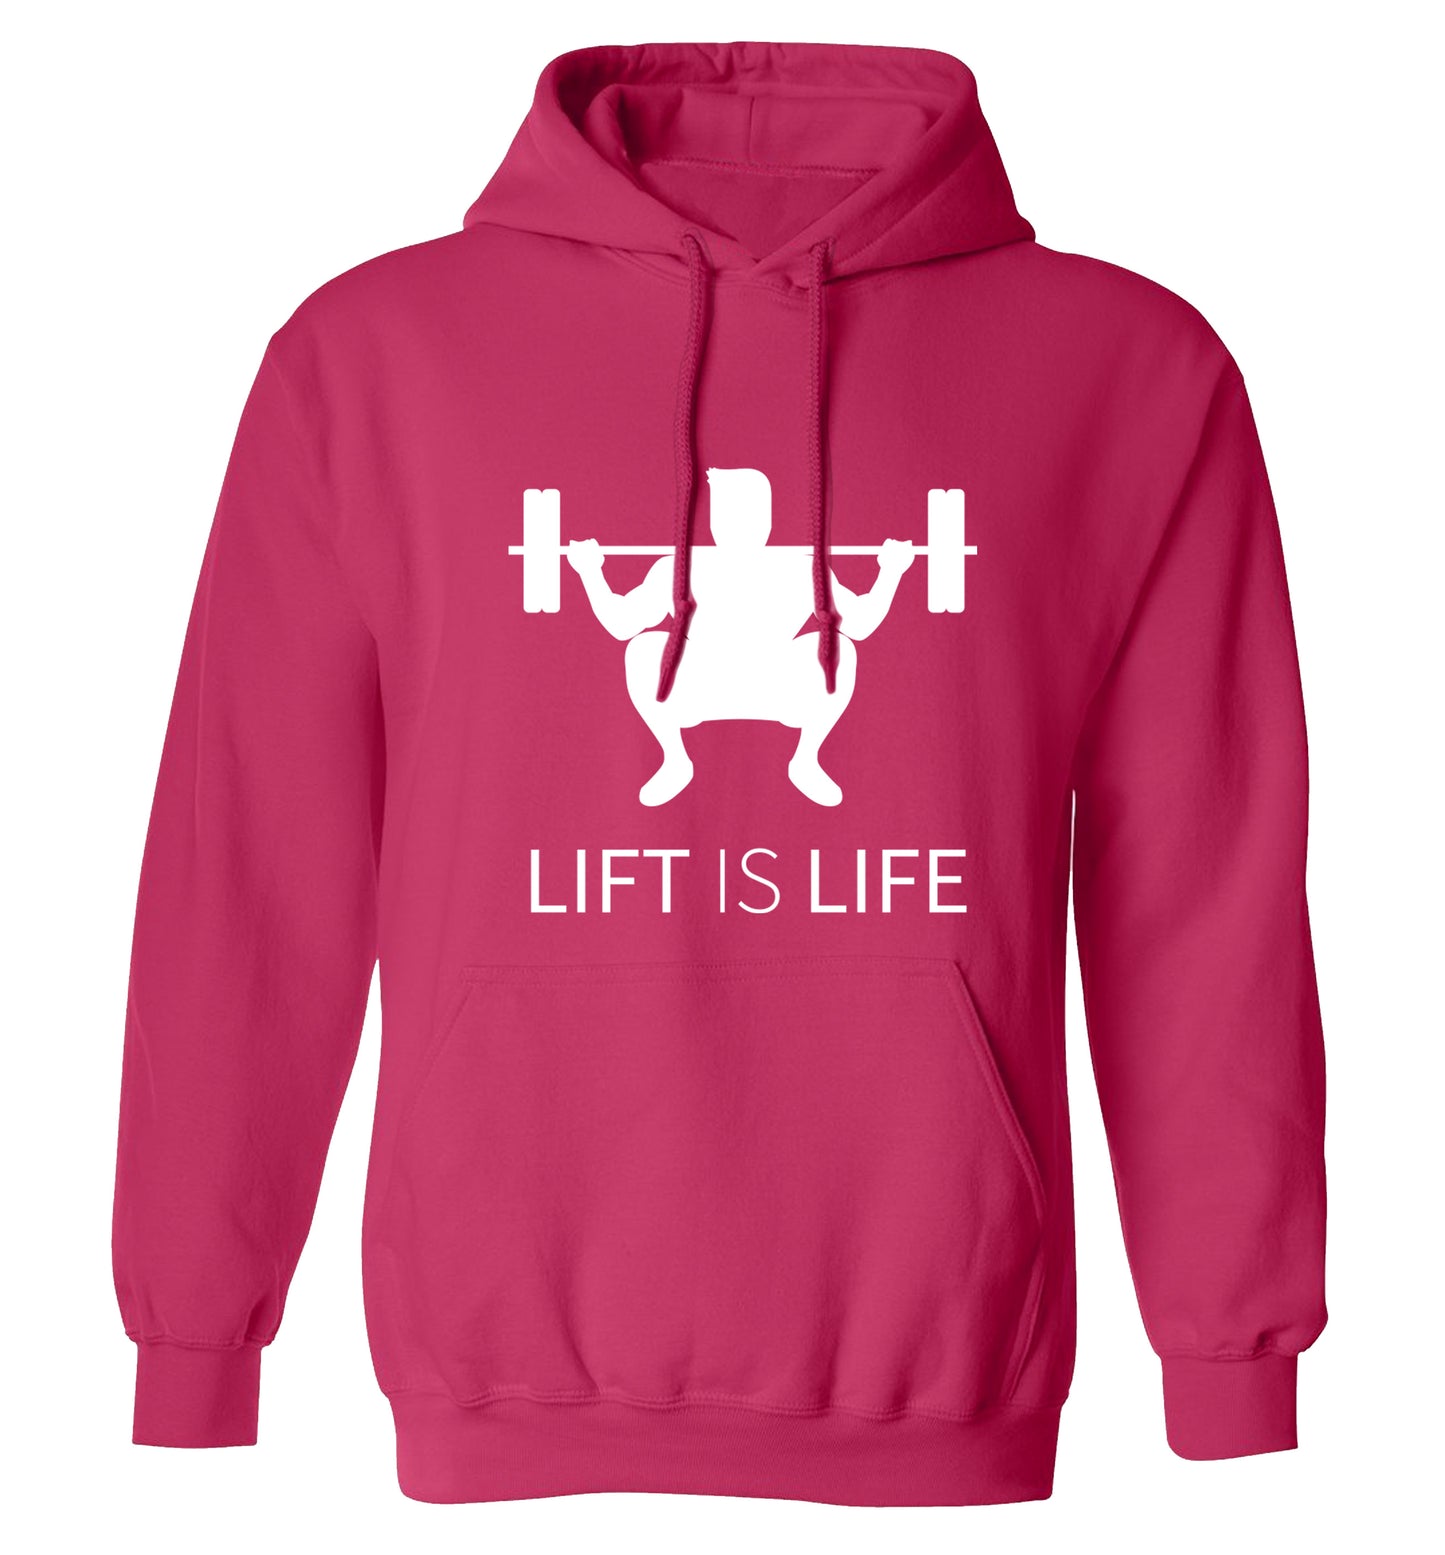 Lift is life adults unisex pink hoodie 2XL